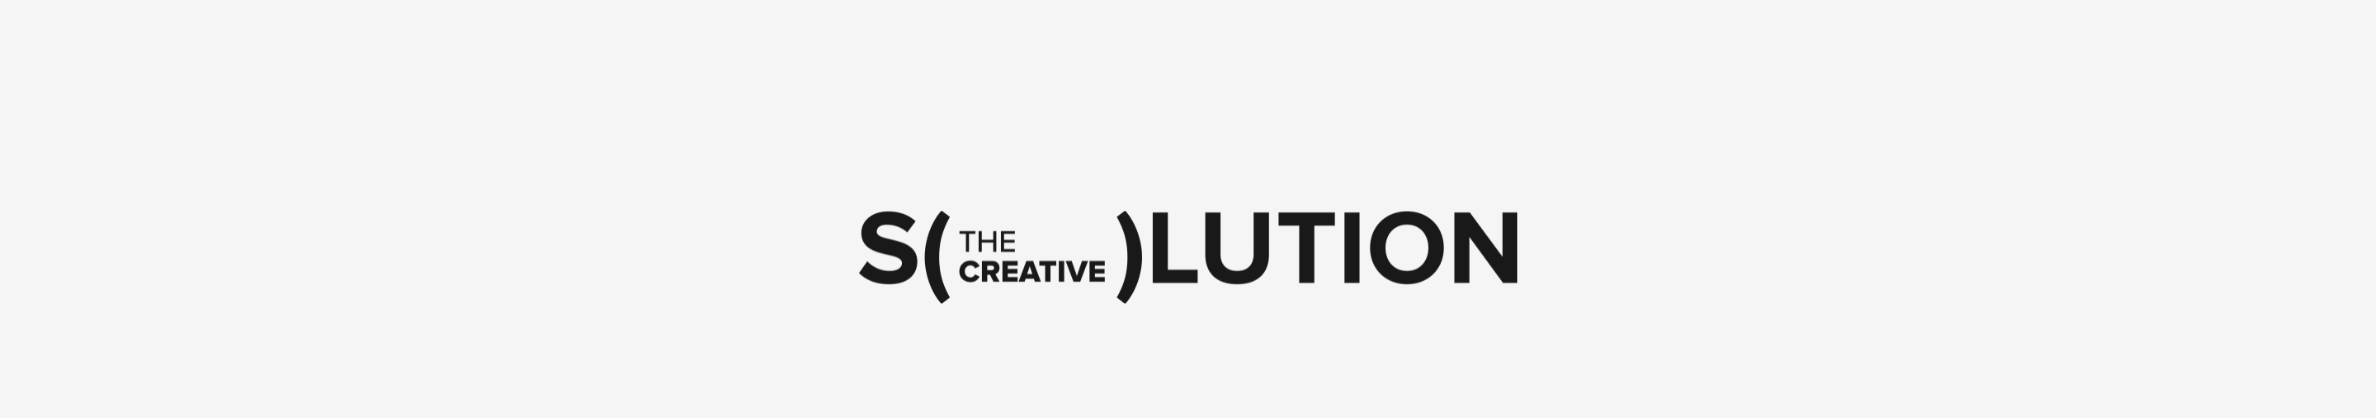 The Creative Solution's profile banner